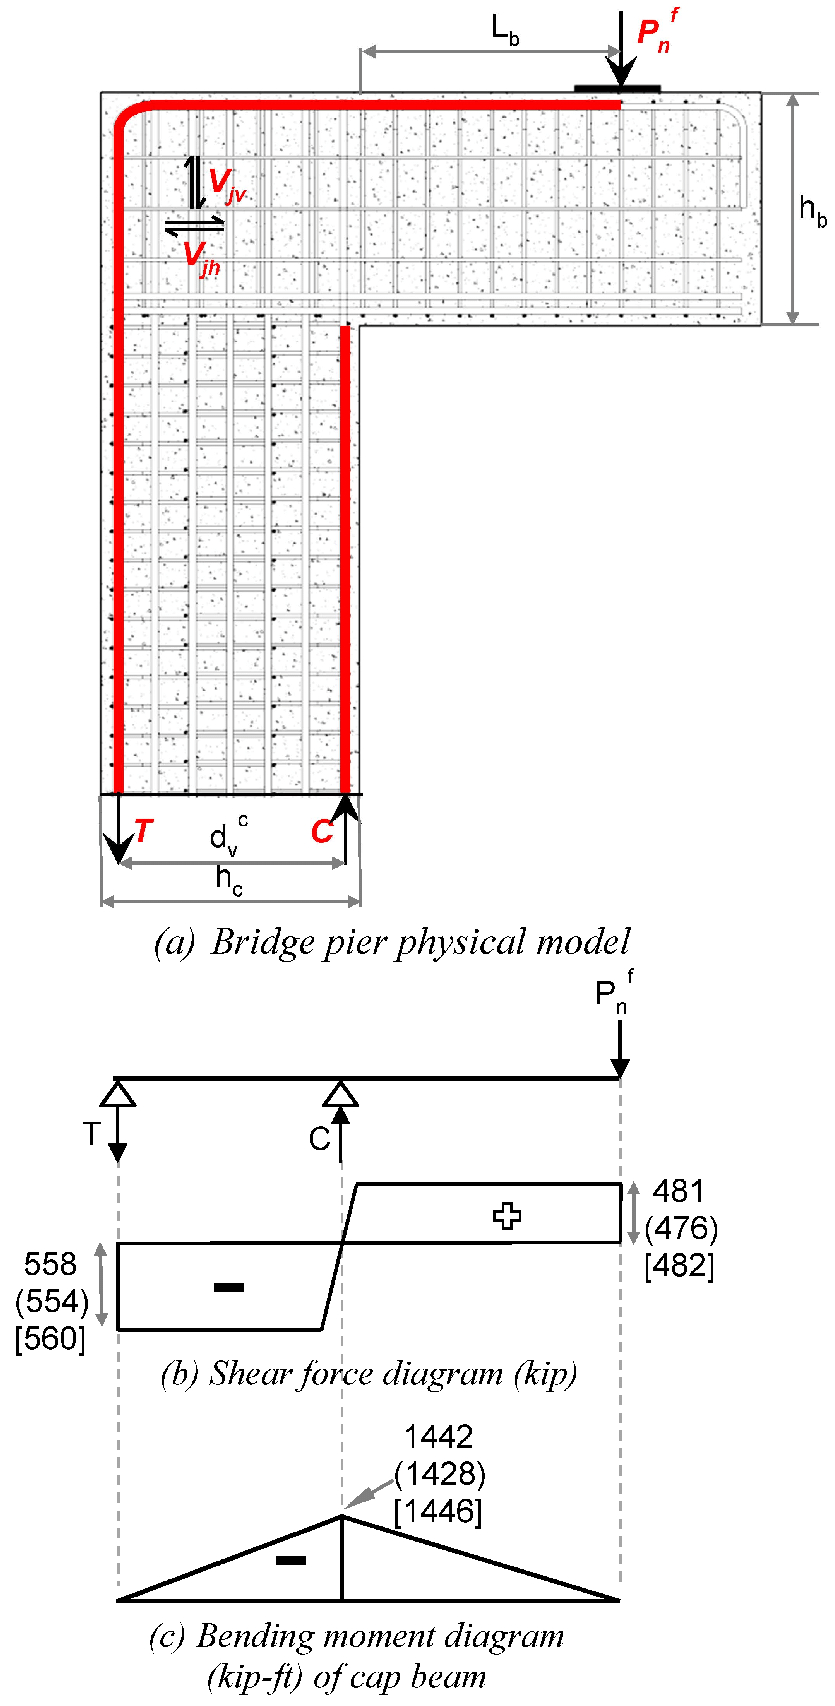 Bending Moment Diagram Shear Force And Bending Moment Diagram Of The Equivalent Beam Model